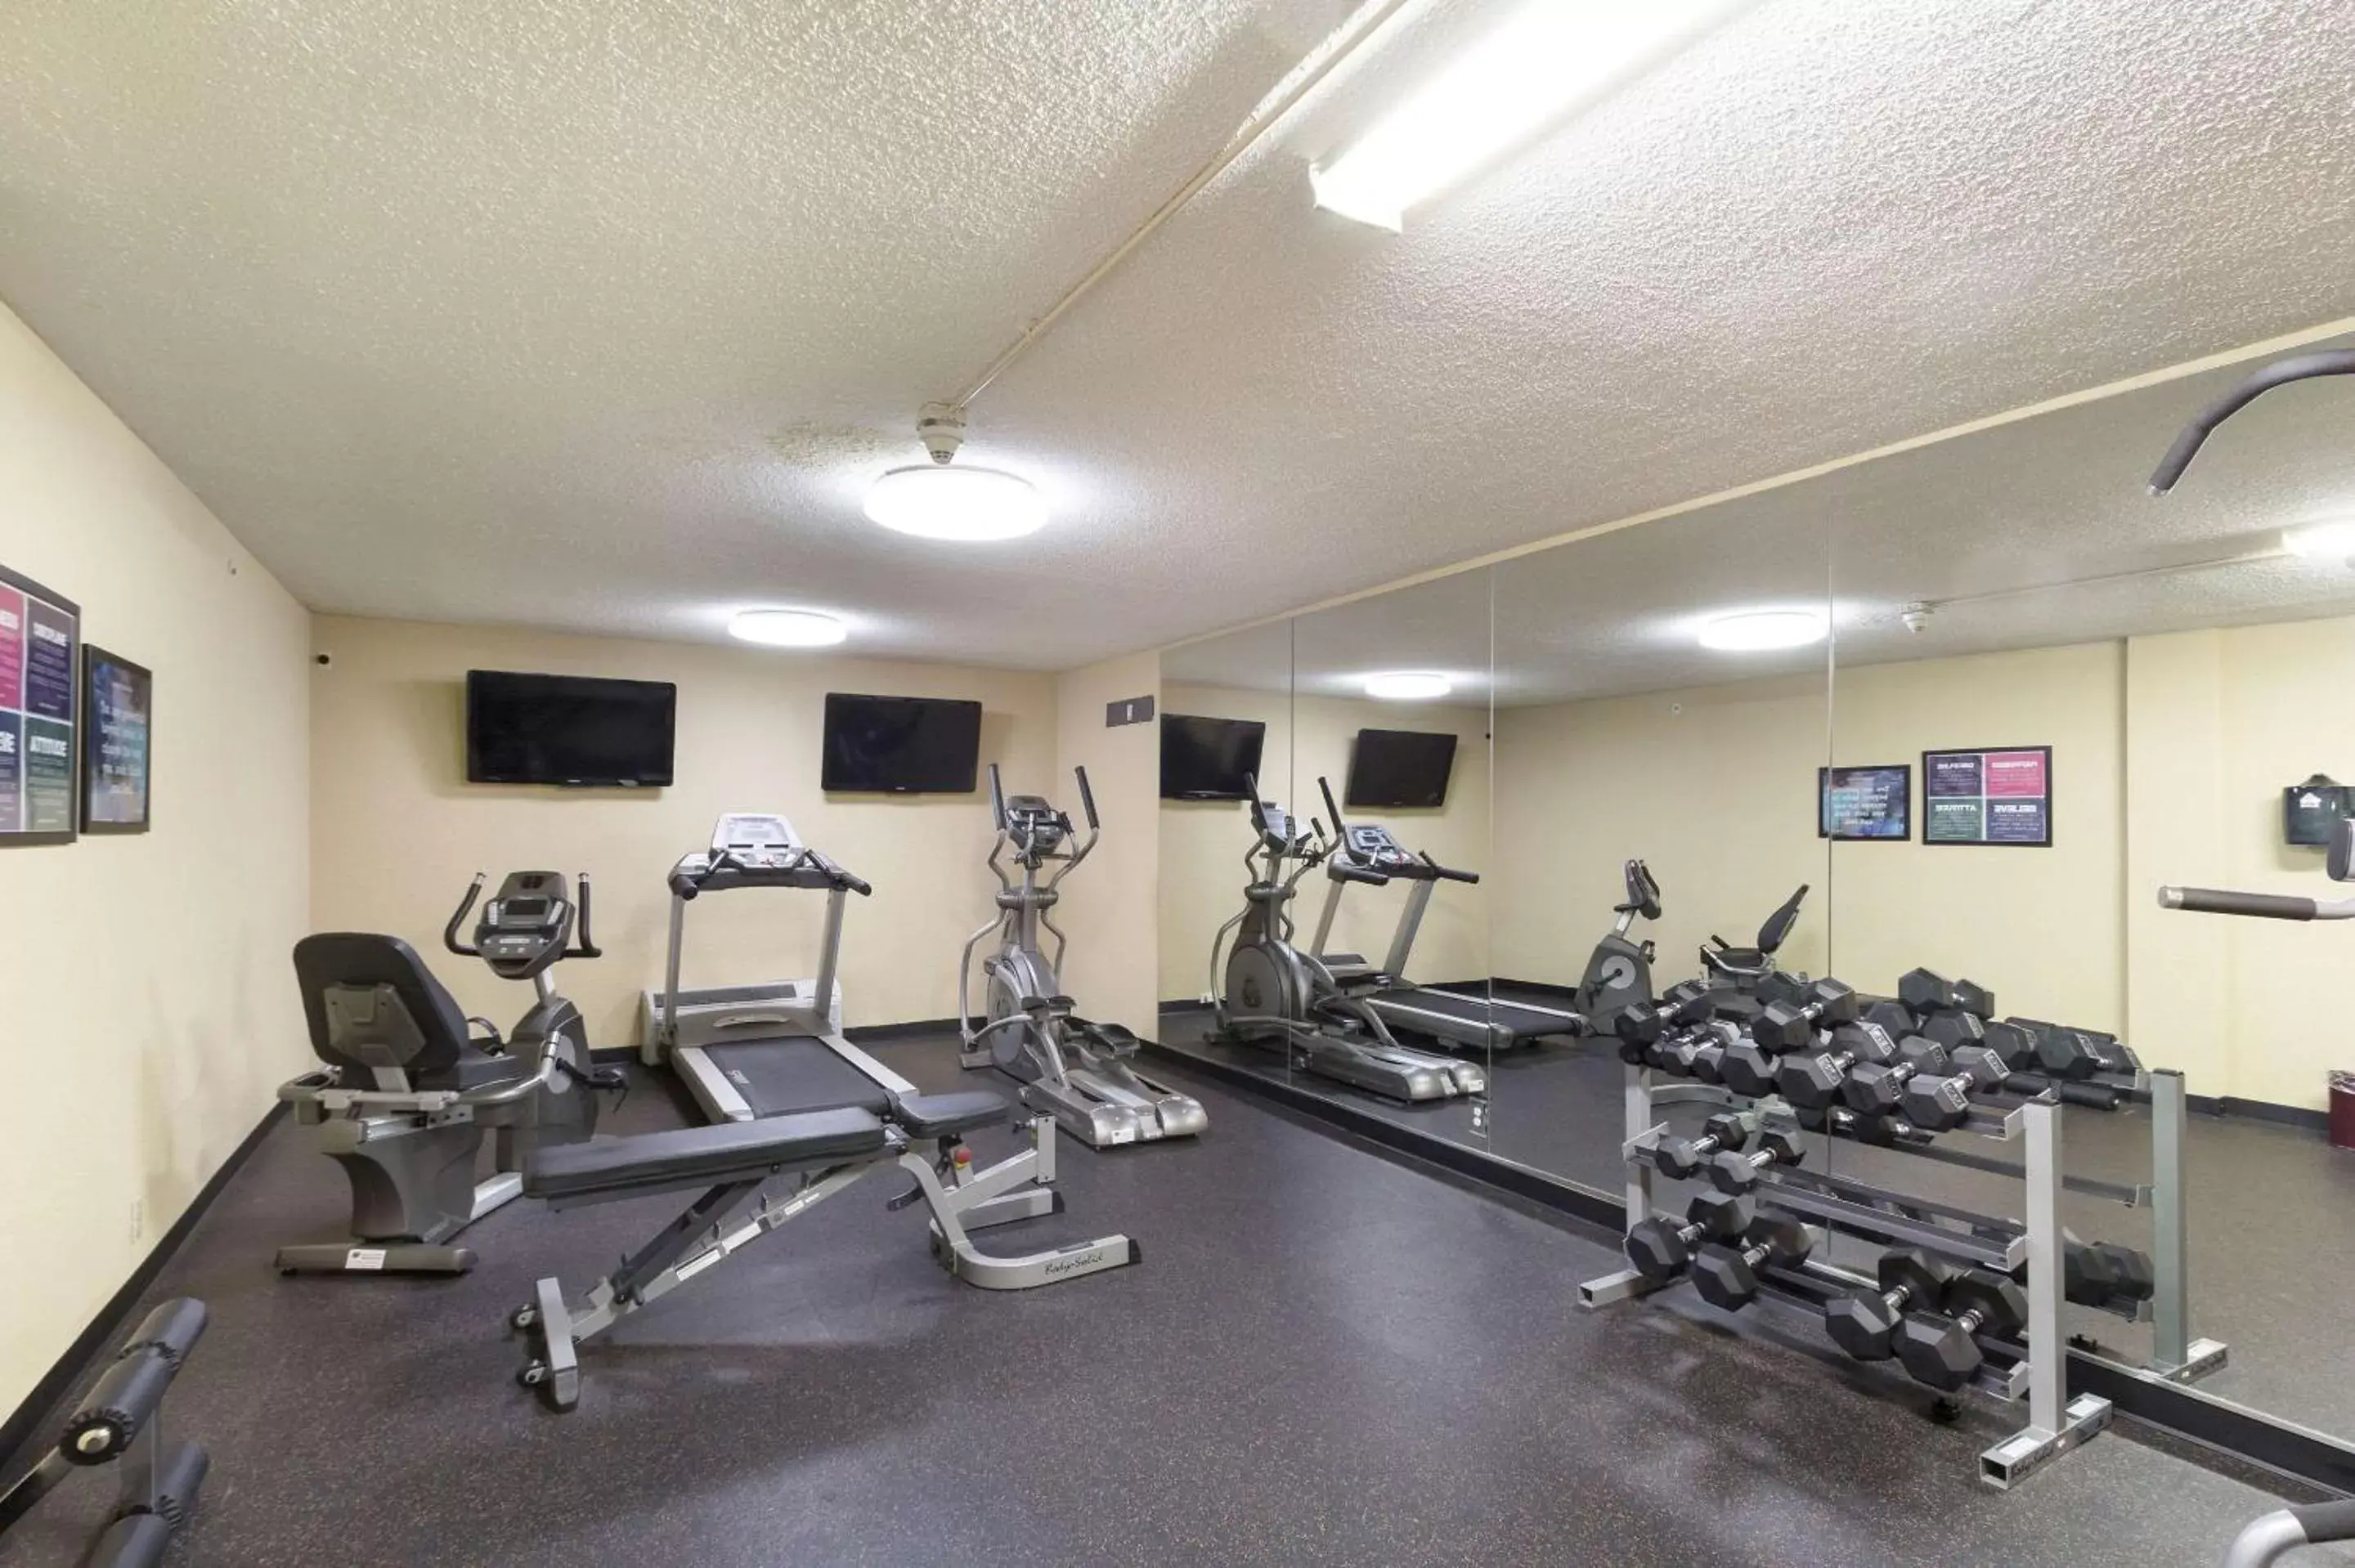 Fitness centre/facilities, Fitness Center/Facilities in Clarion Hotel Beachwood-Cleveland